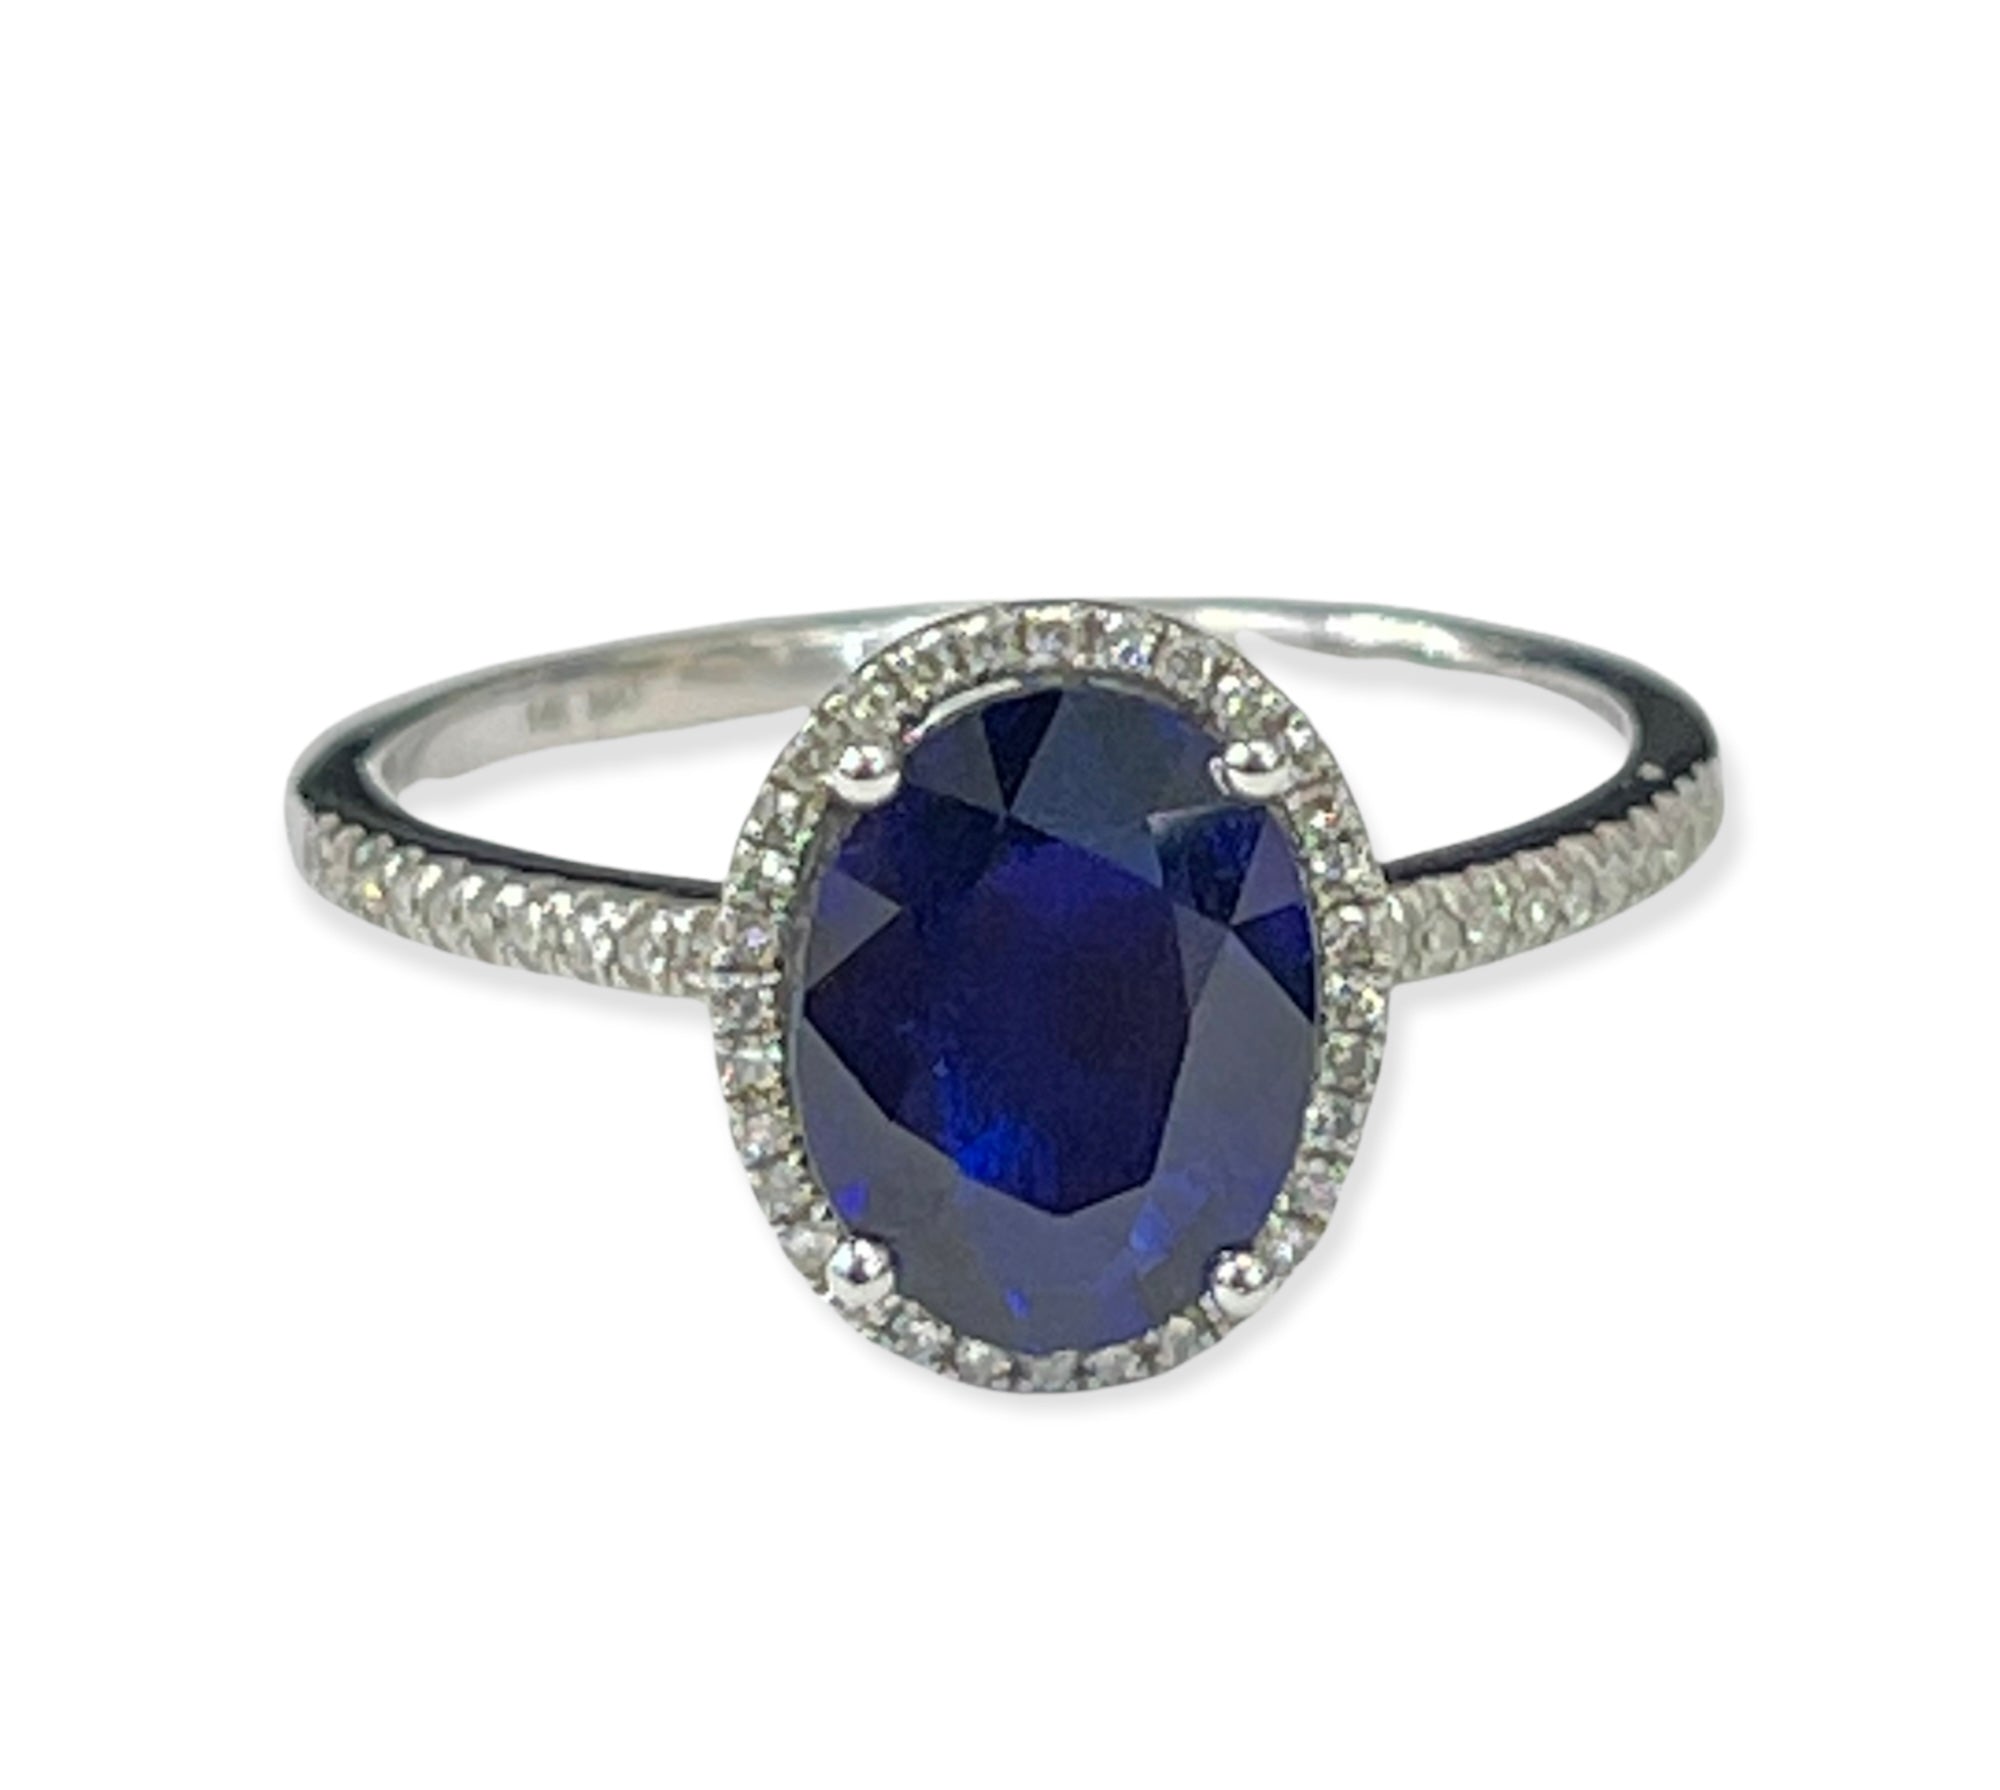 Blue Sapphire Oval Halo Diamond Ring White Gold 14KT